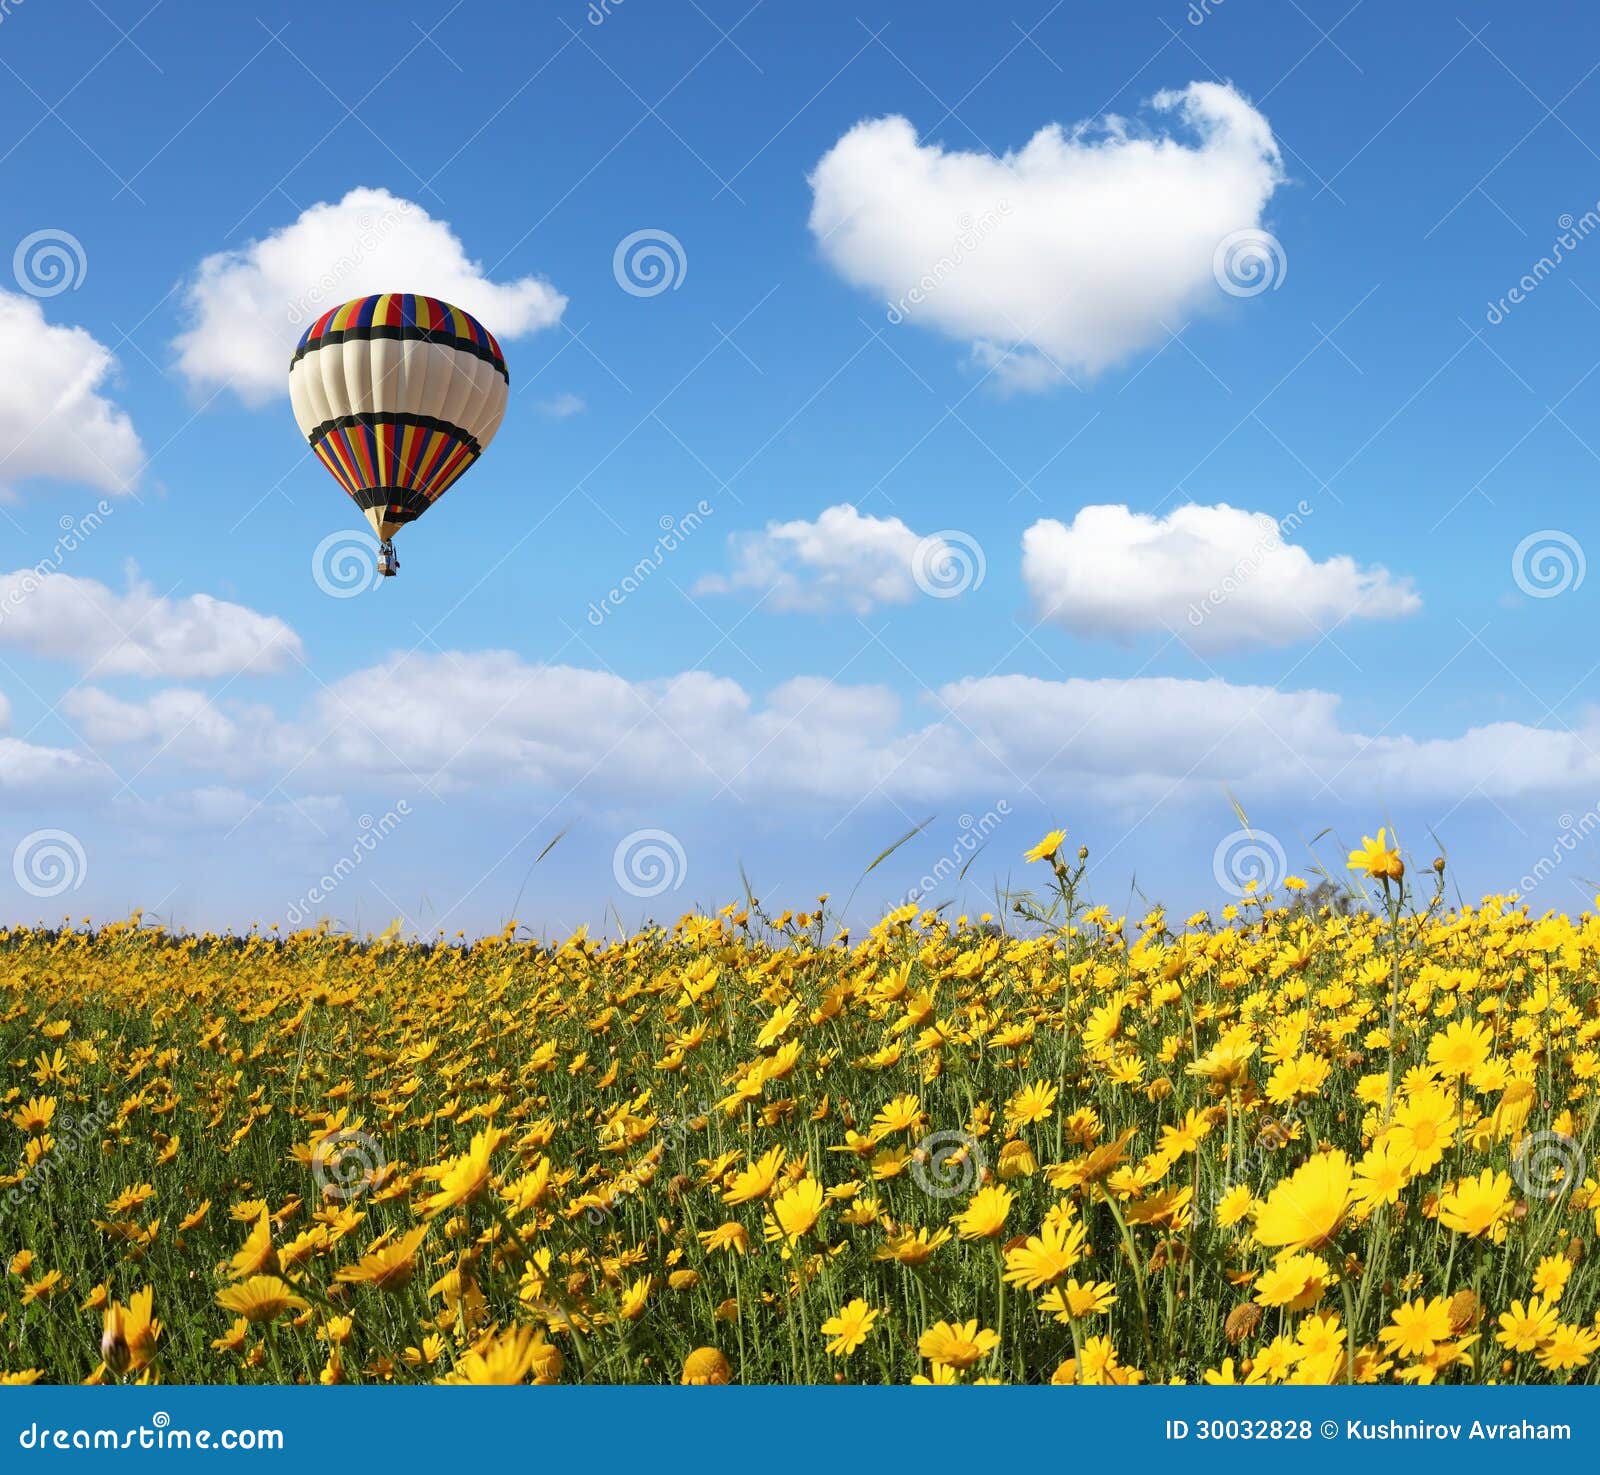 Over the Blossoming Field of Flying a Balloon Stock Photo - Image of ...